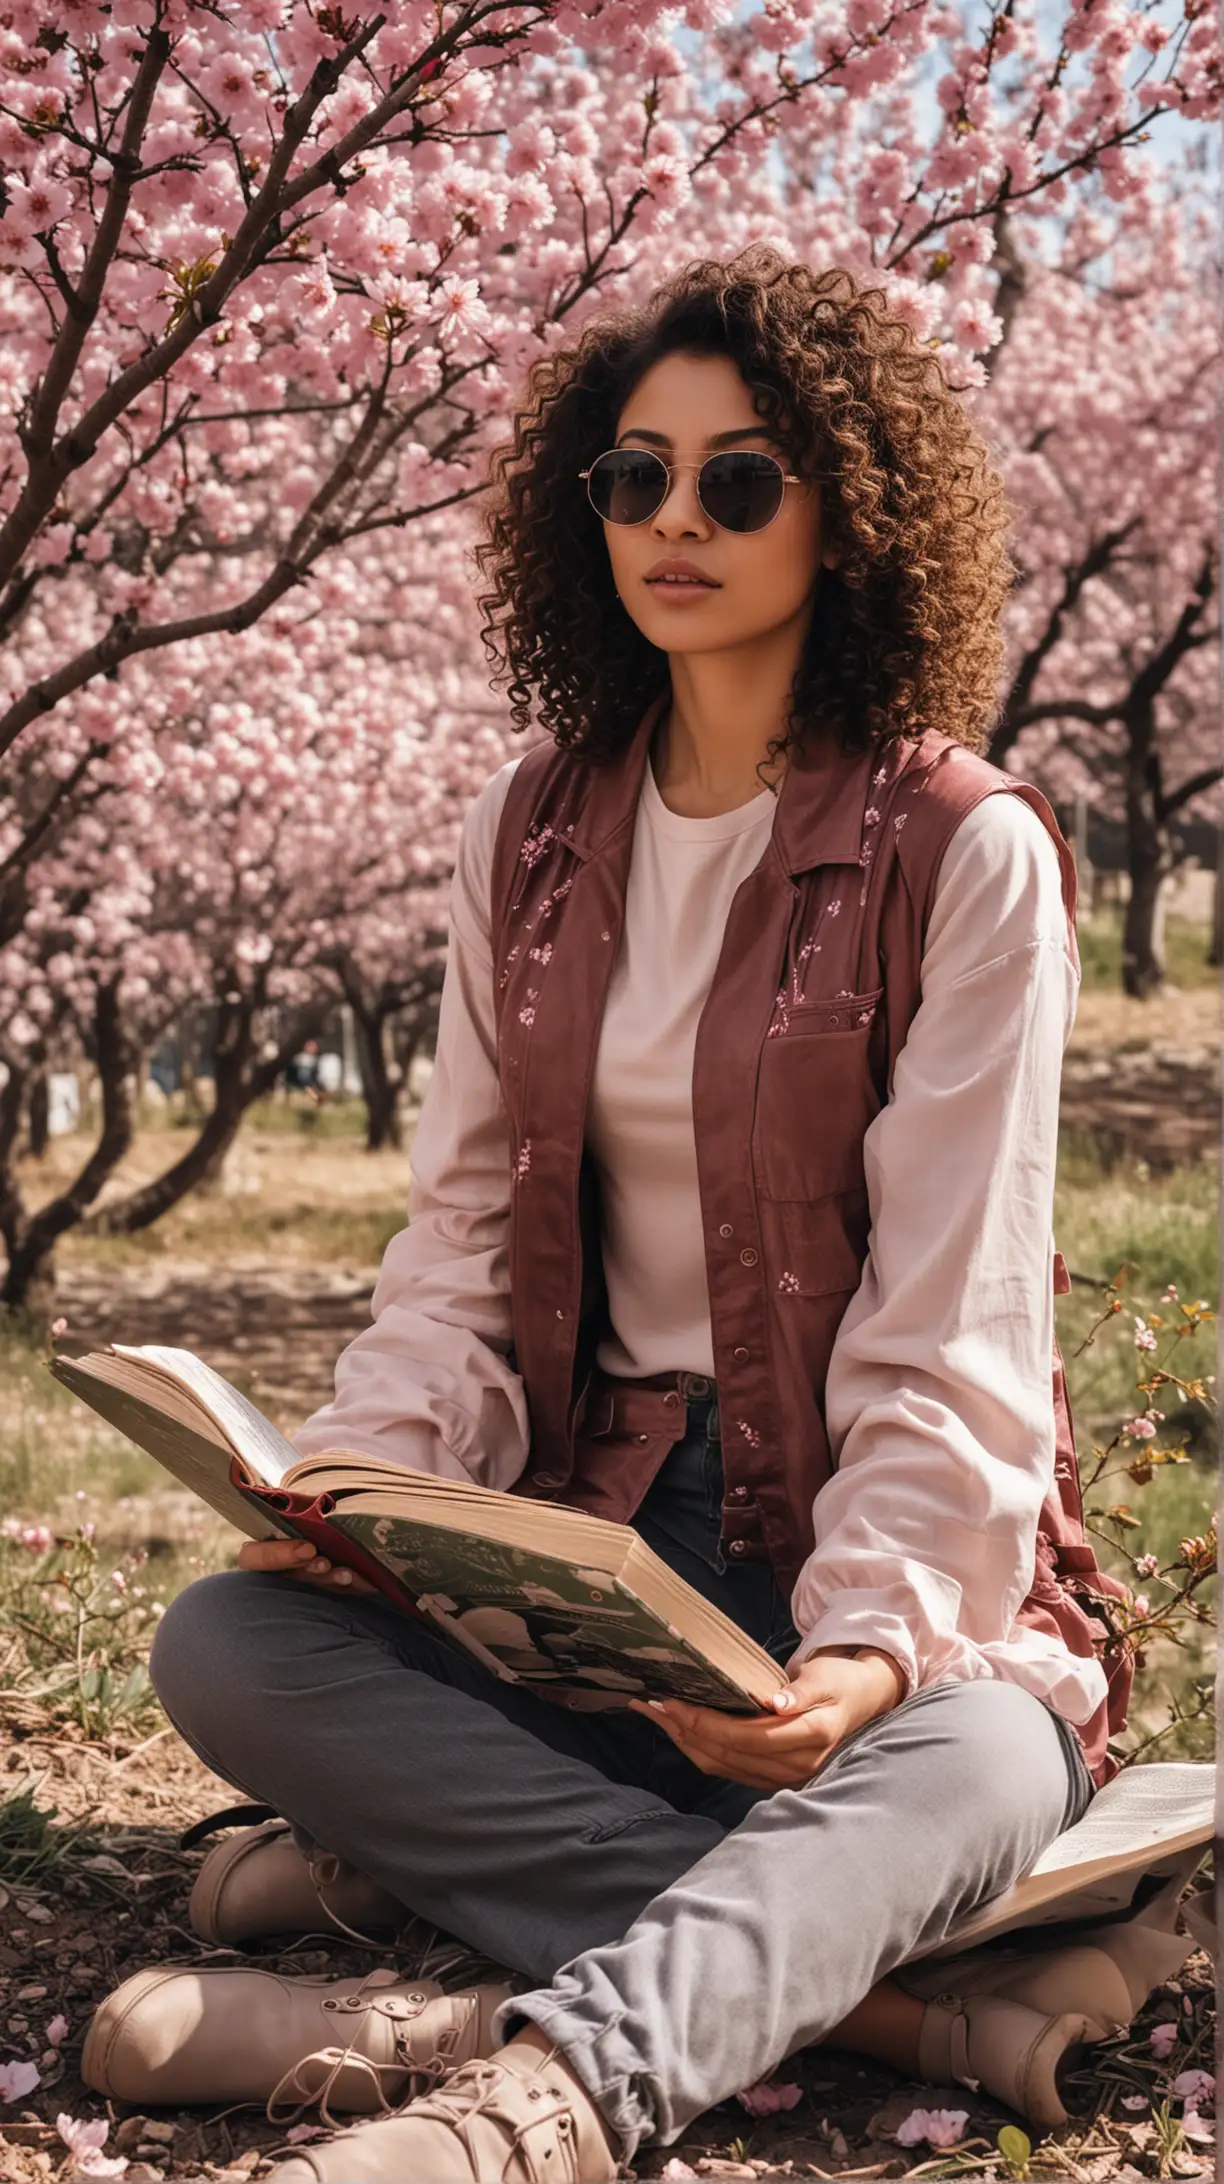 CurlyHaired Girl Reading Under Cherry Blossom Tree in MatrixInspired Outfit